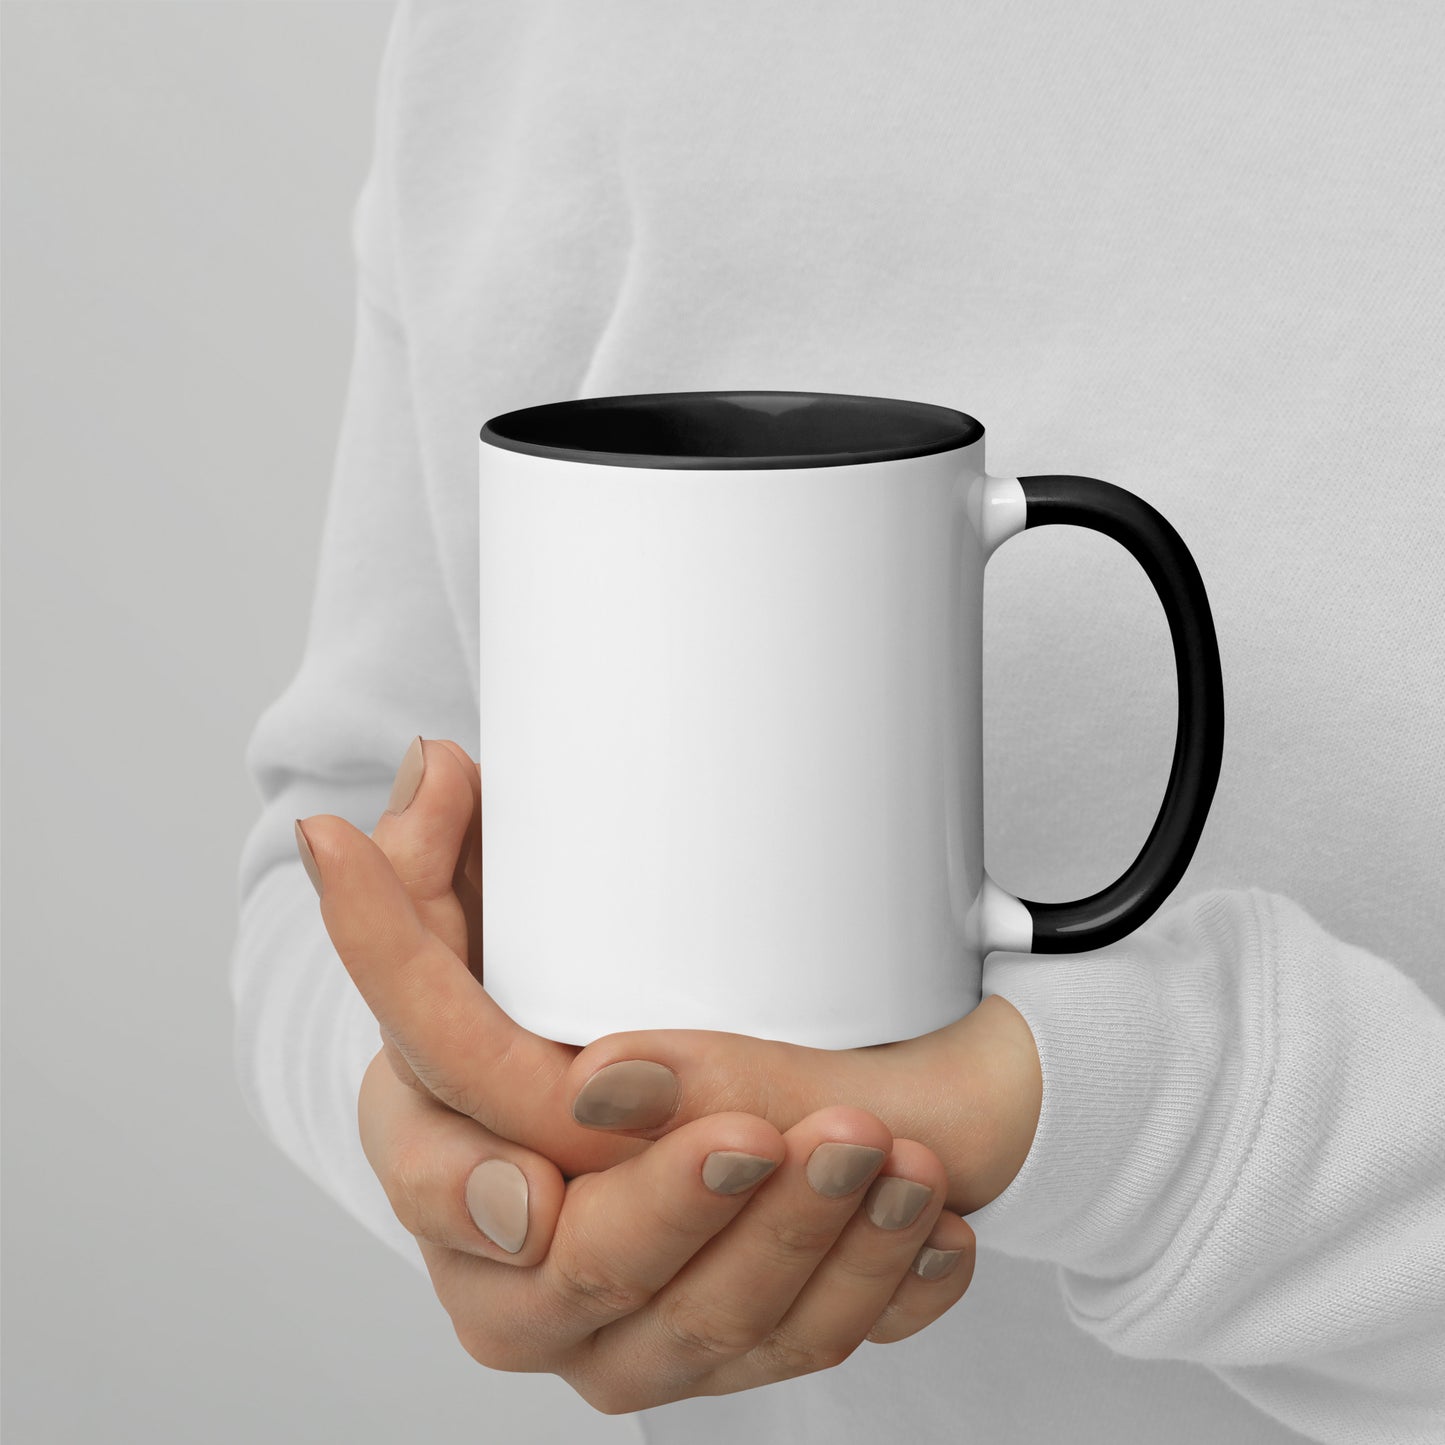 'It's Just my Sauce' Mug with Color Inside